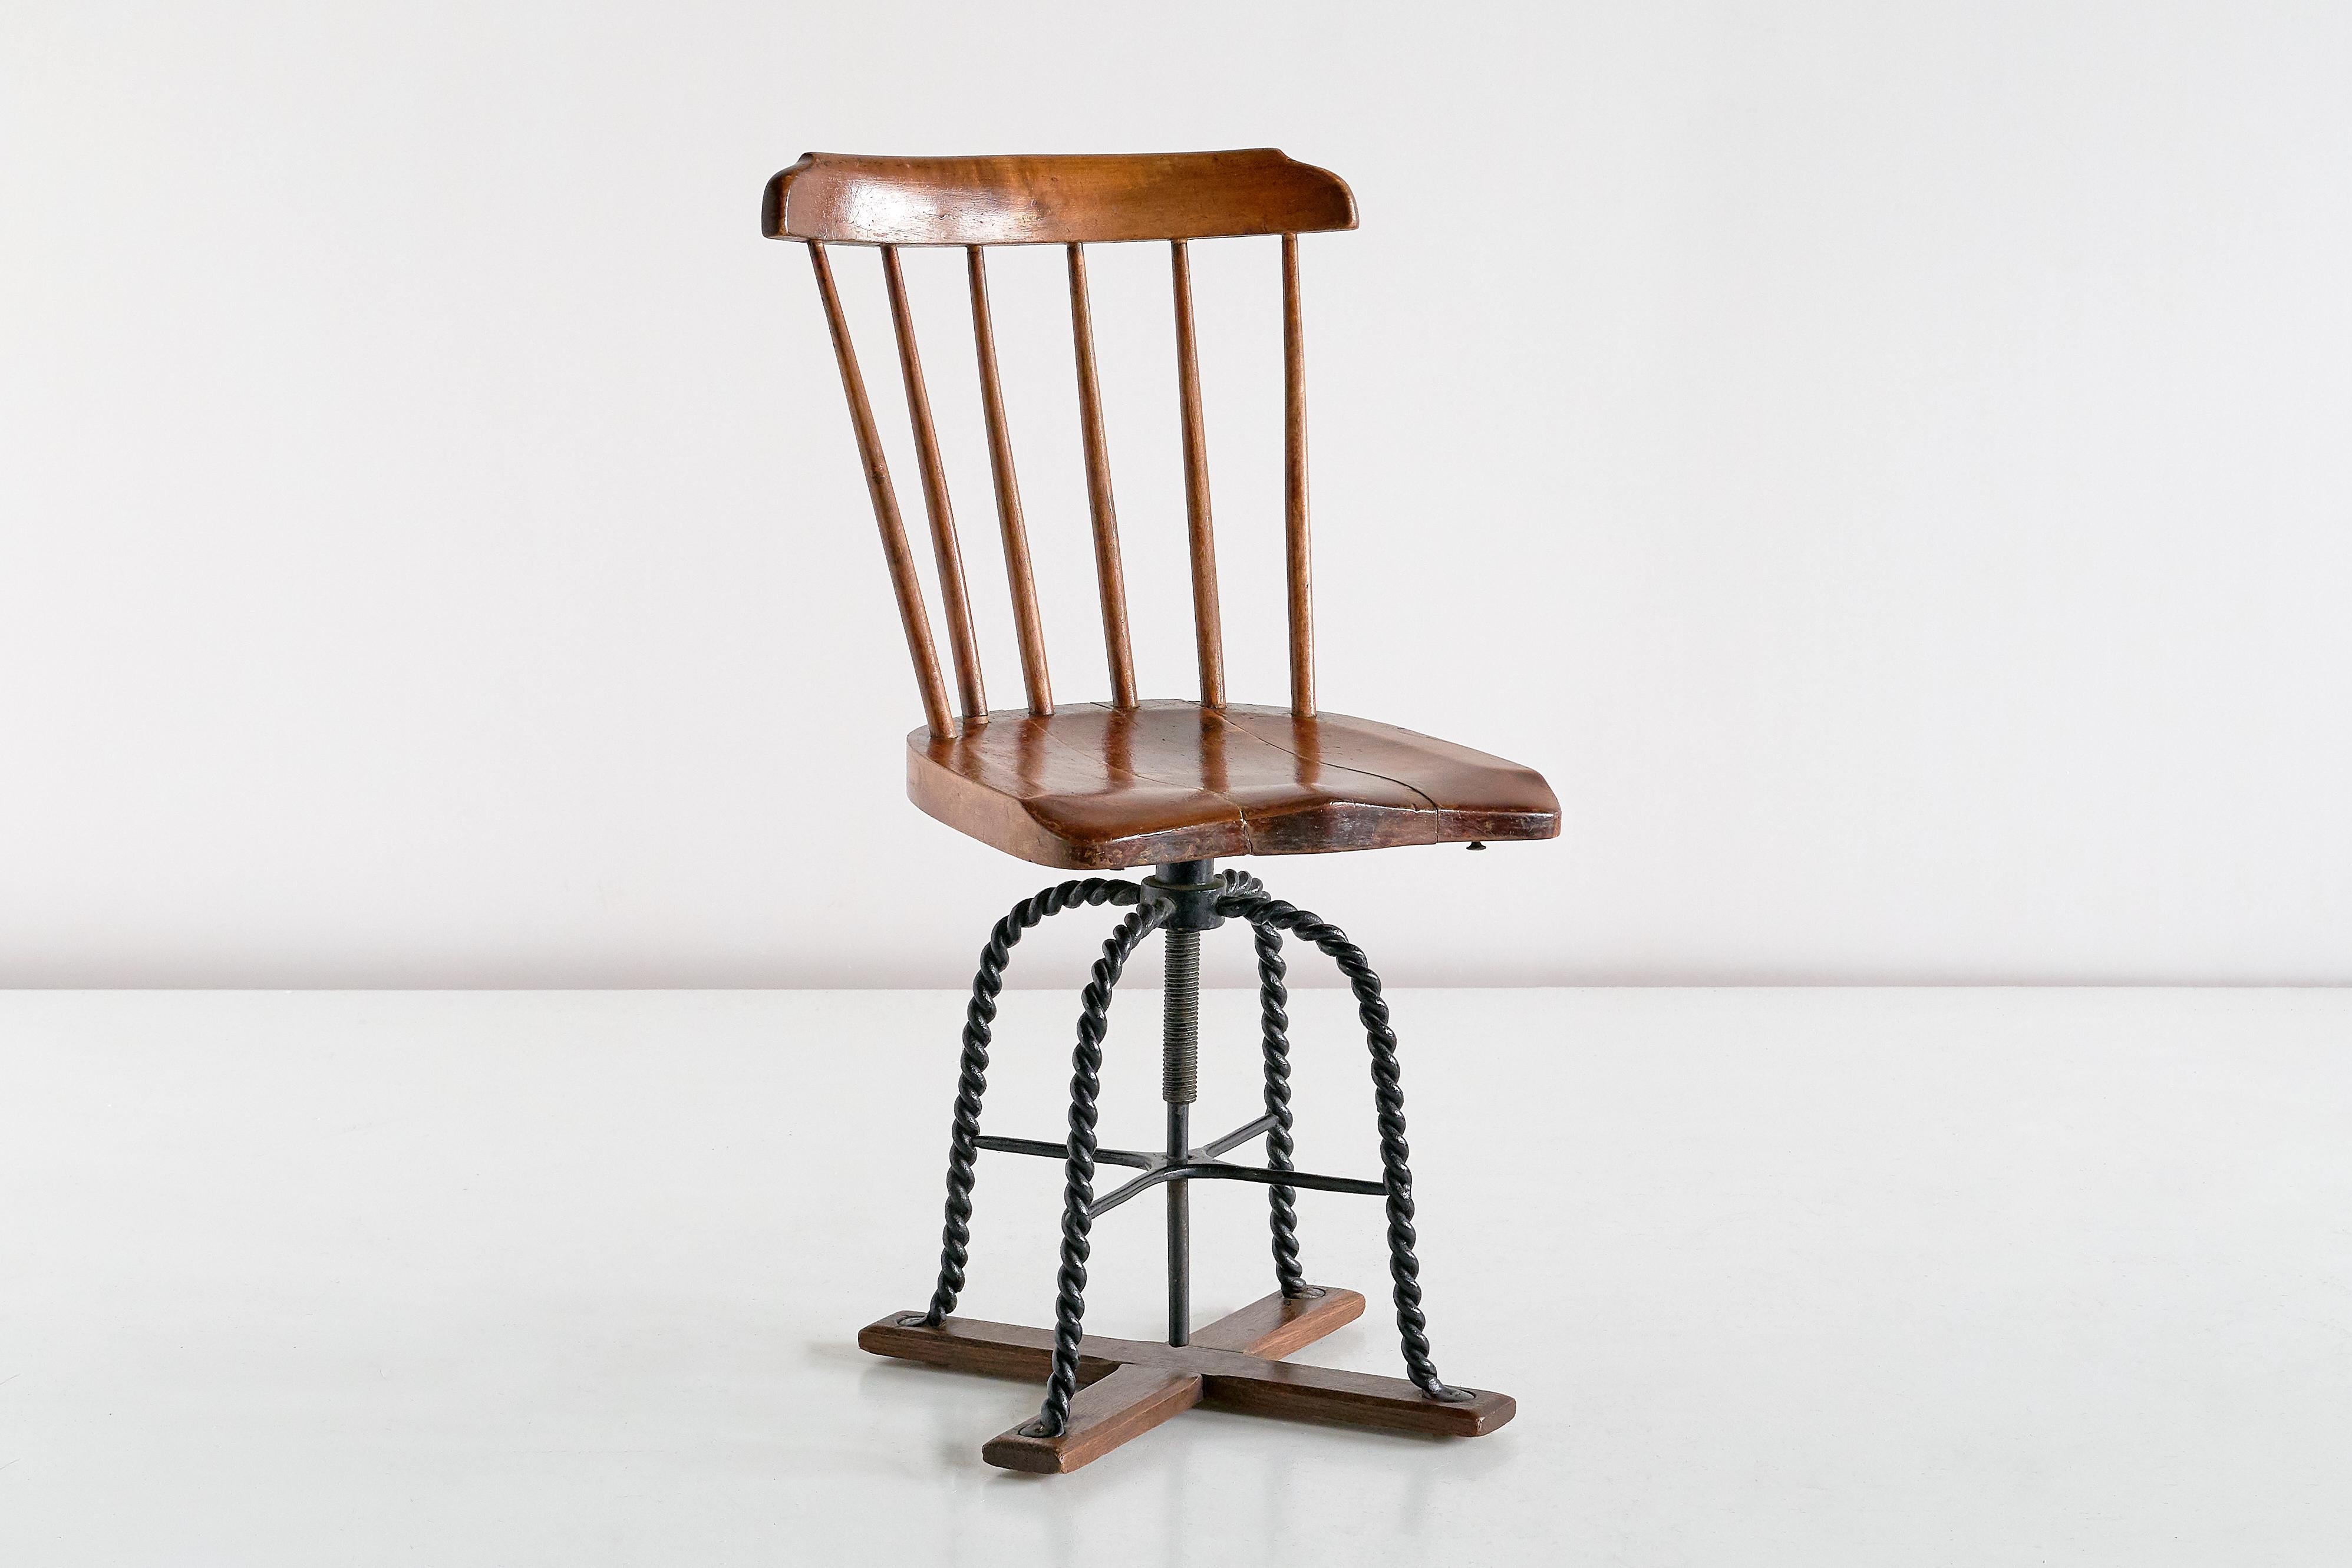 This unique swivel desk chair is coming from the private collection of a former boat captain living in the coastal town of Sölvesborg in Southern Sweden. Originally the swivel chair was made as the captain's chair aboard the ship he sailed with in